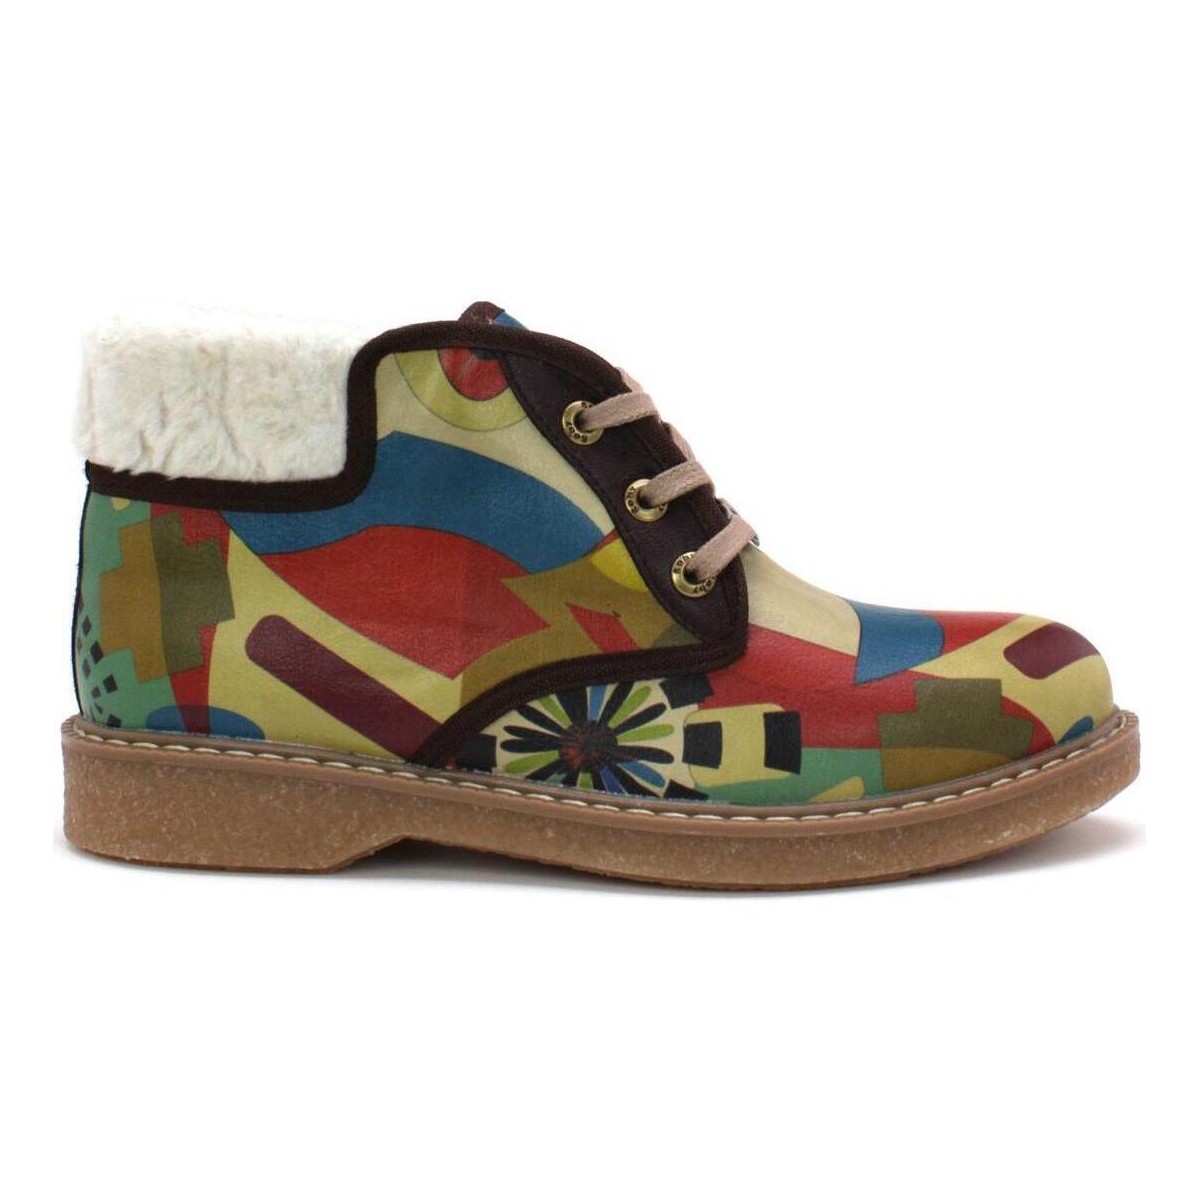 Chaussures Femme Boots Goby GKP502 multicolour